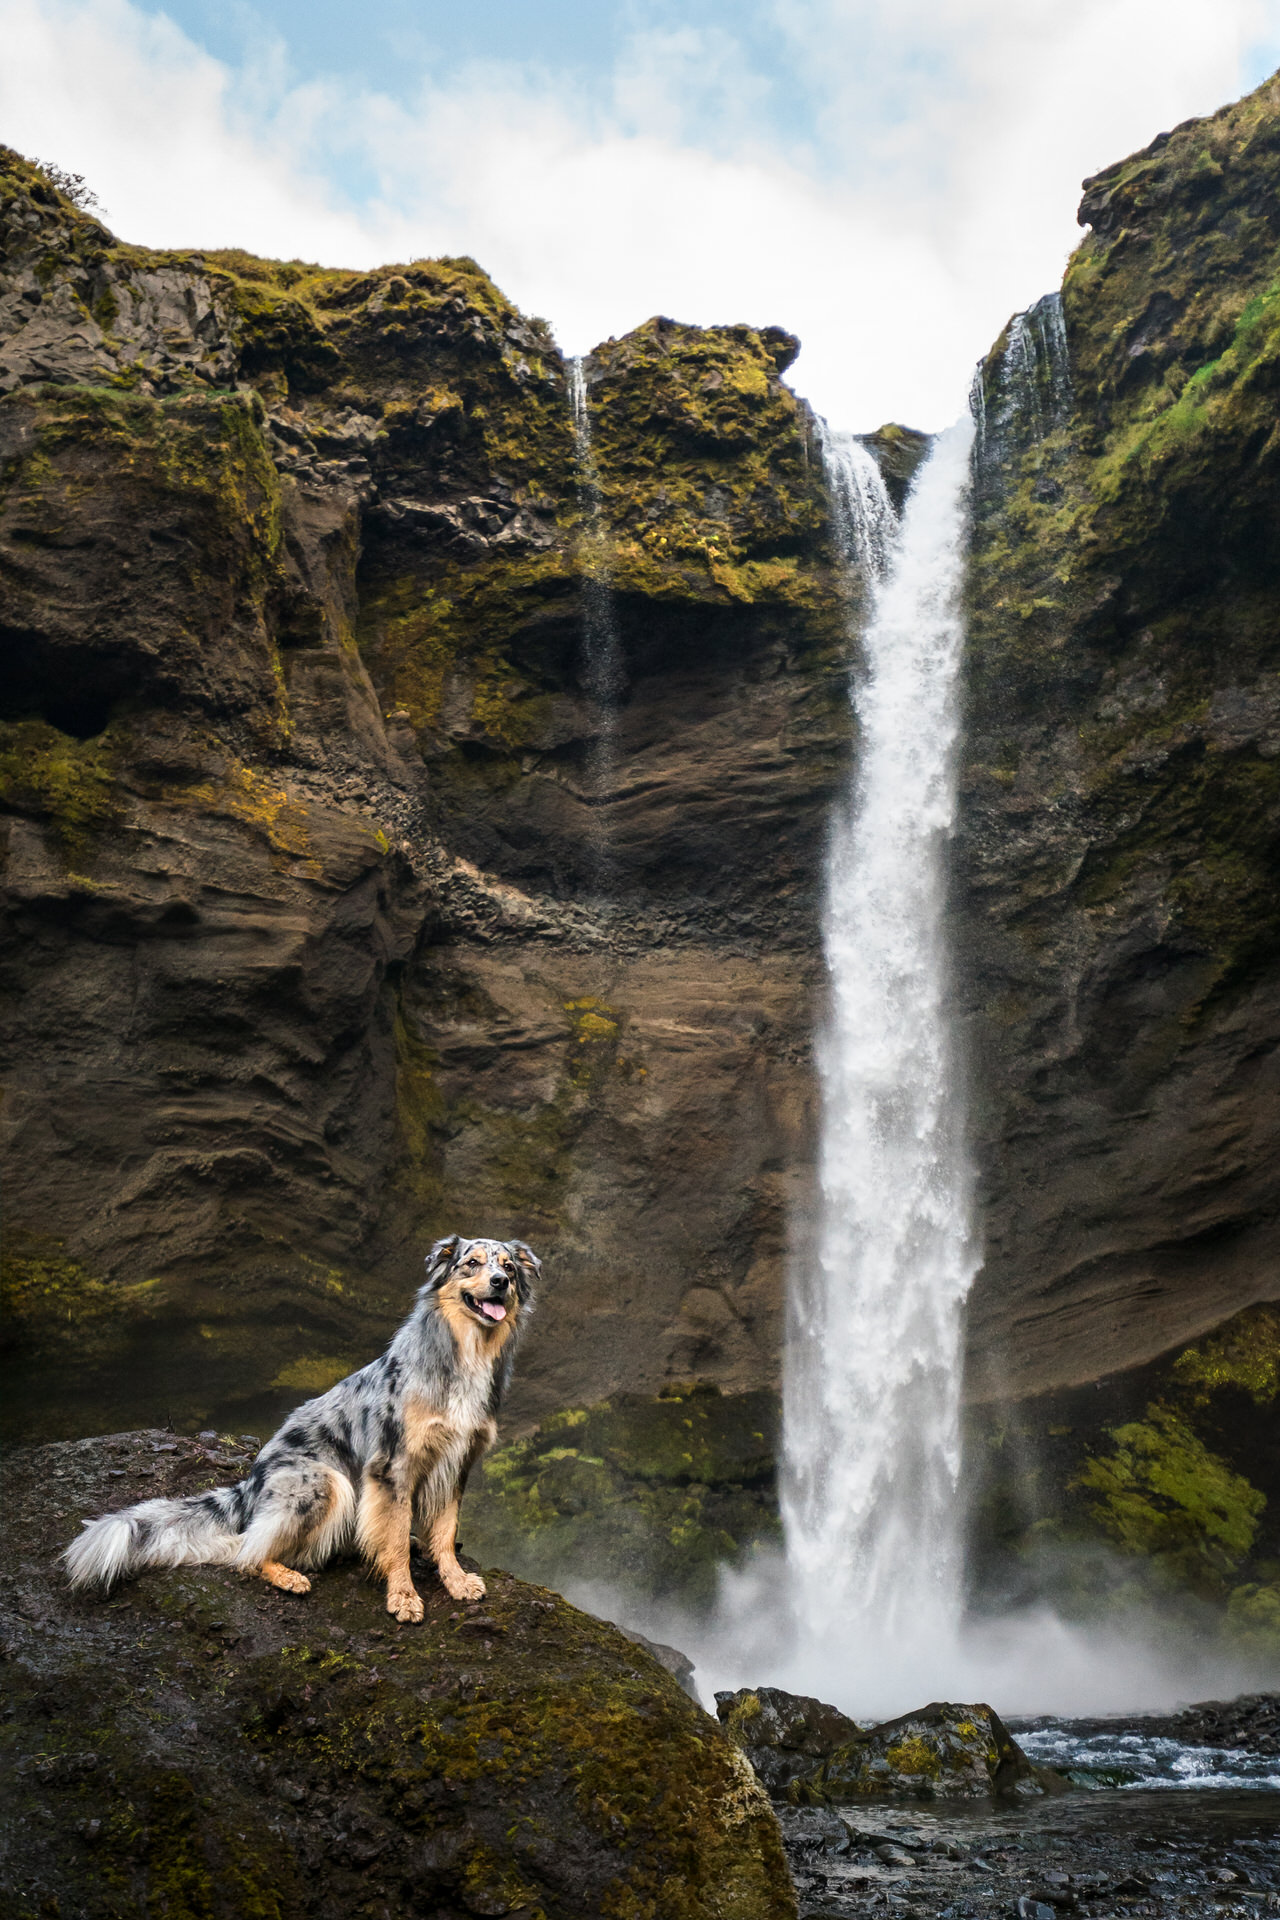 Dog sitting in front of waterfall in Iceland.